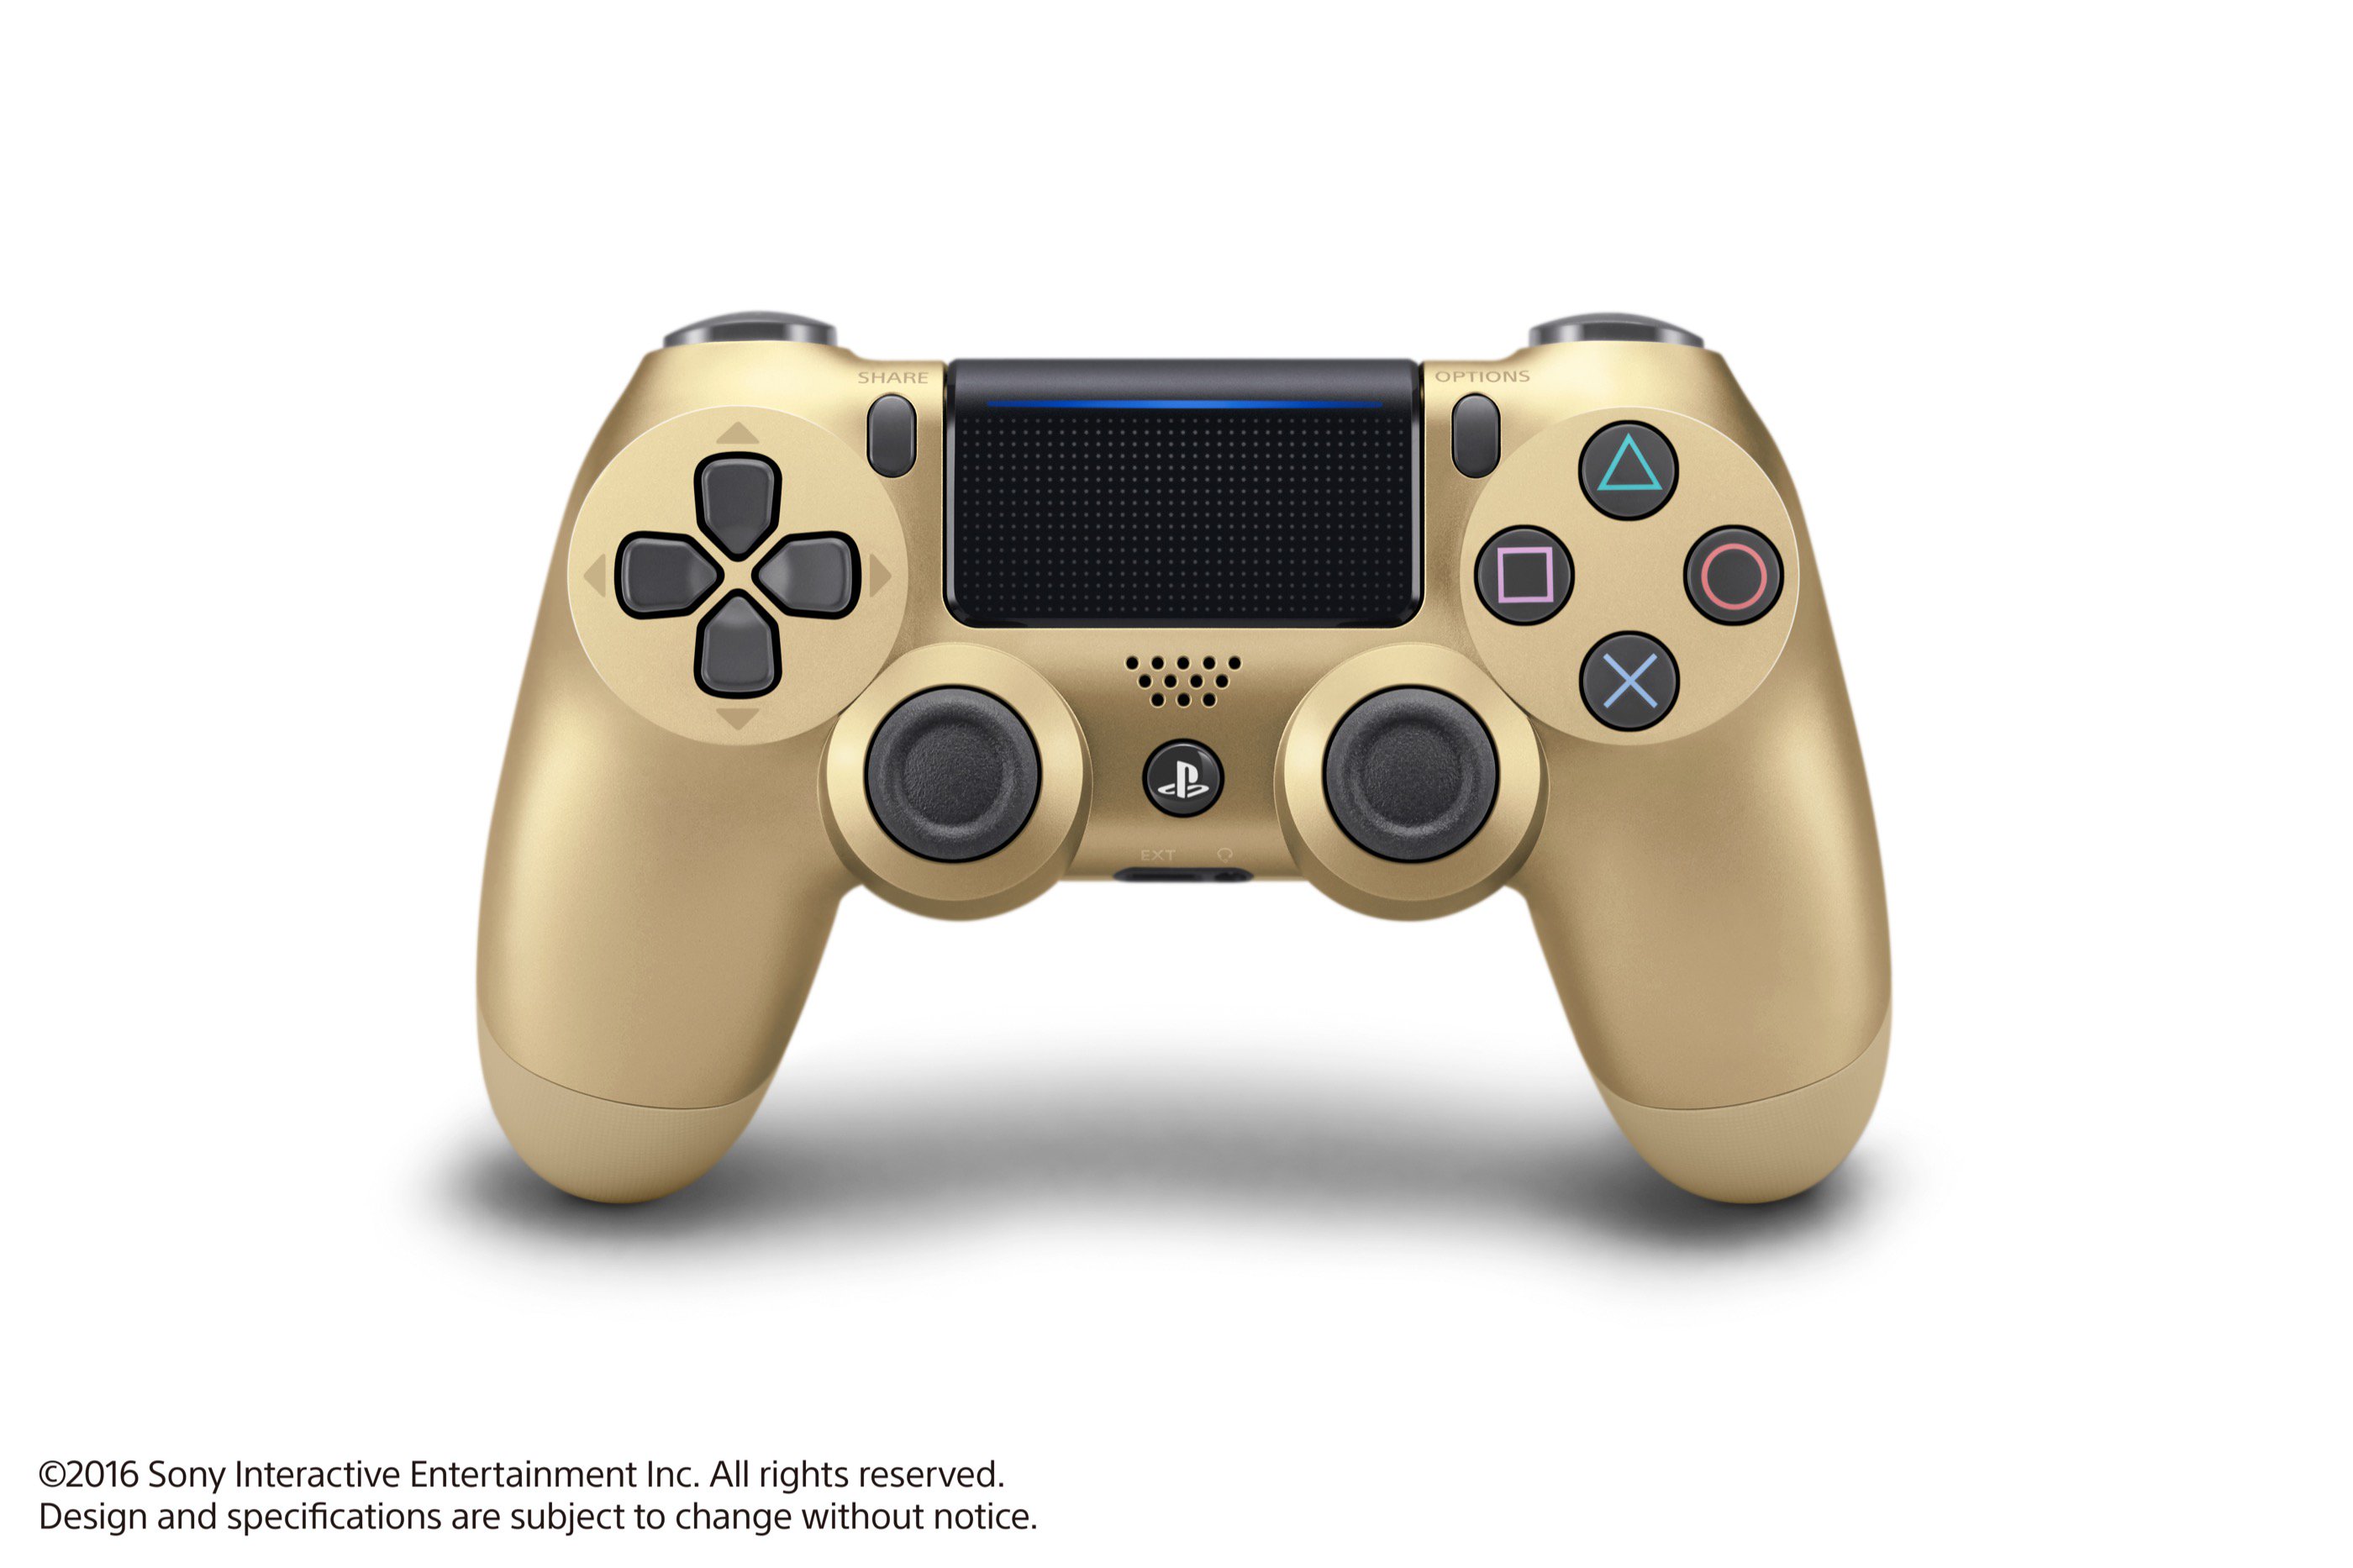 defile pris rulletrappe PlayStation auf Twitter: „Introducing the Gold DualShock 4, available  exclusively at GameStop starting mid-November: https://t.co/U0b7dggCQ4  https://t.co/hzp1e6fVWK“ / X